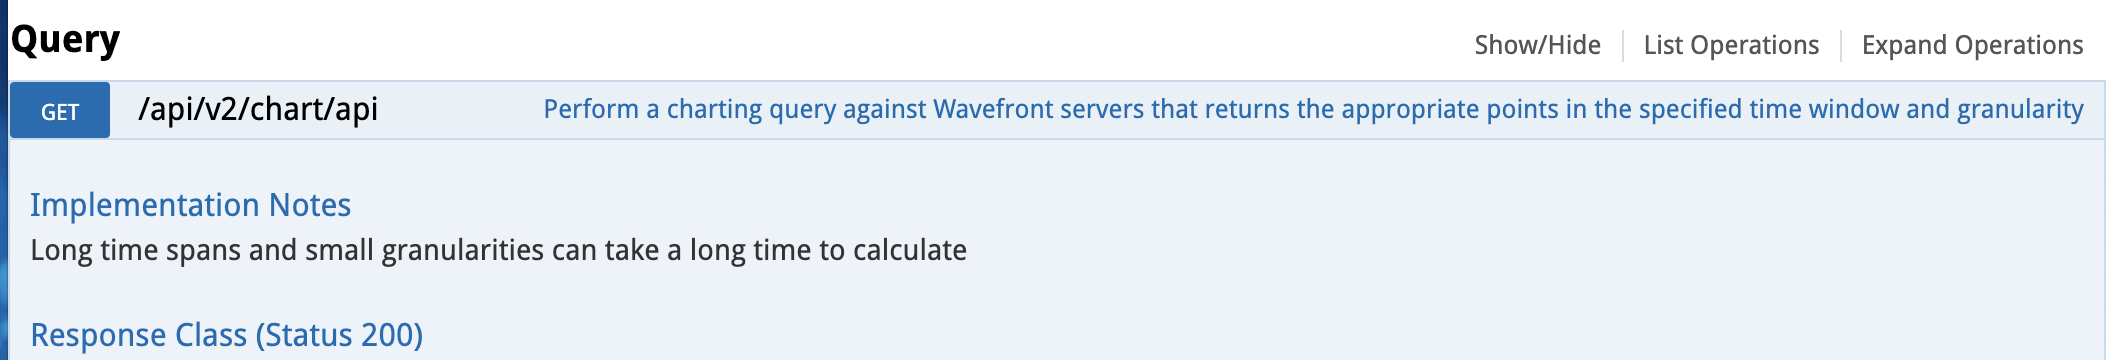 UI image showing where the API is on the Wavefront Swagger UI.